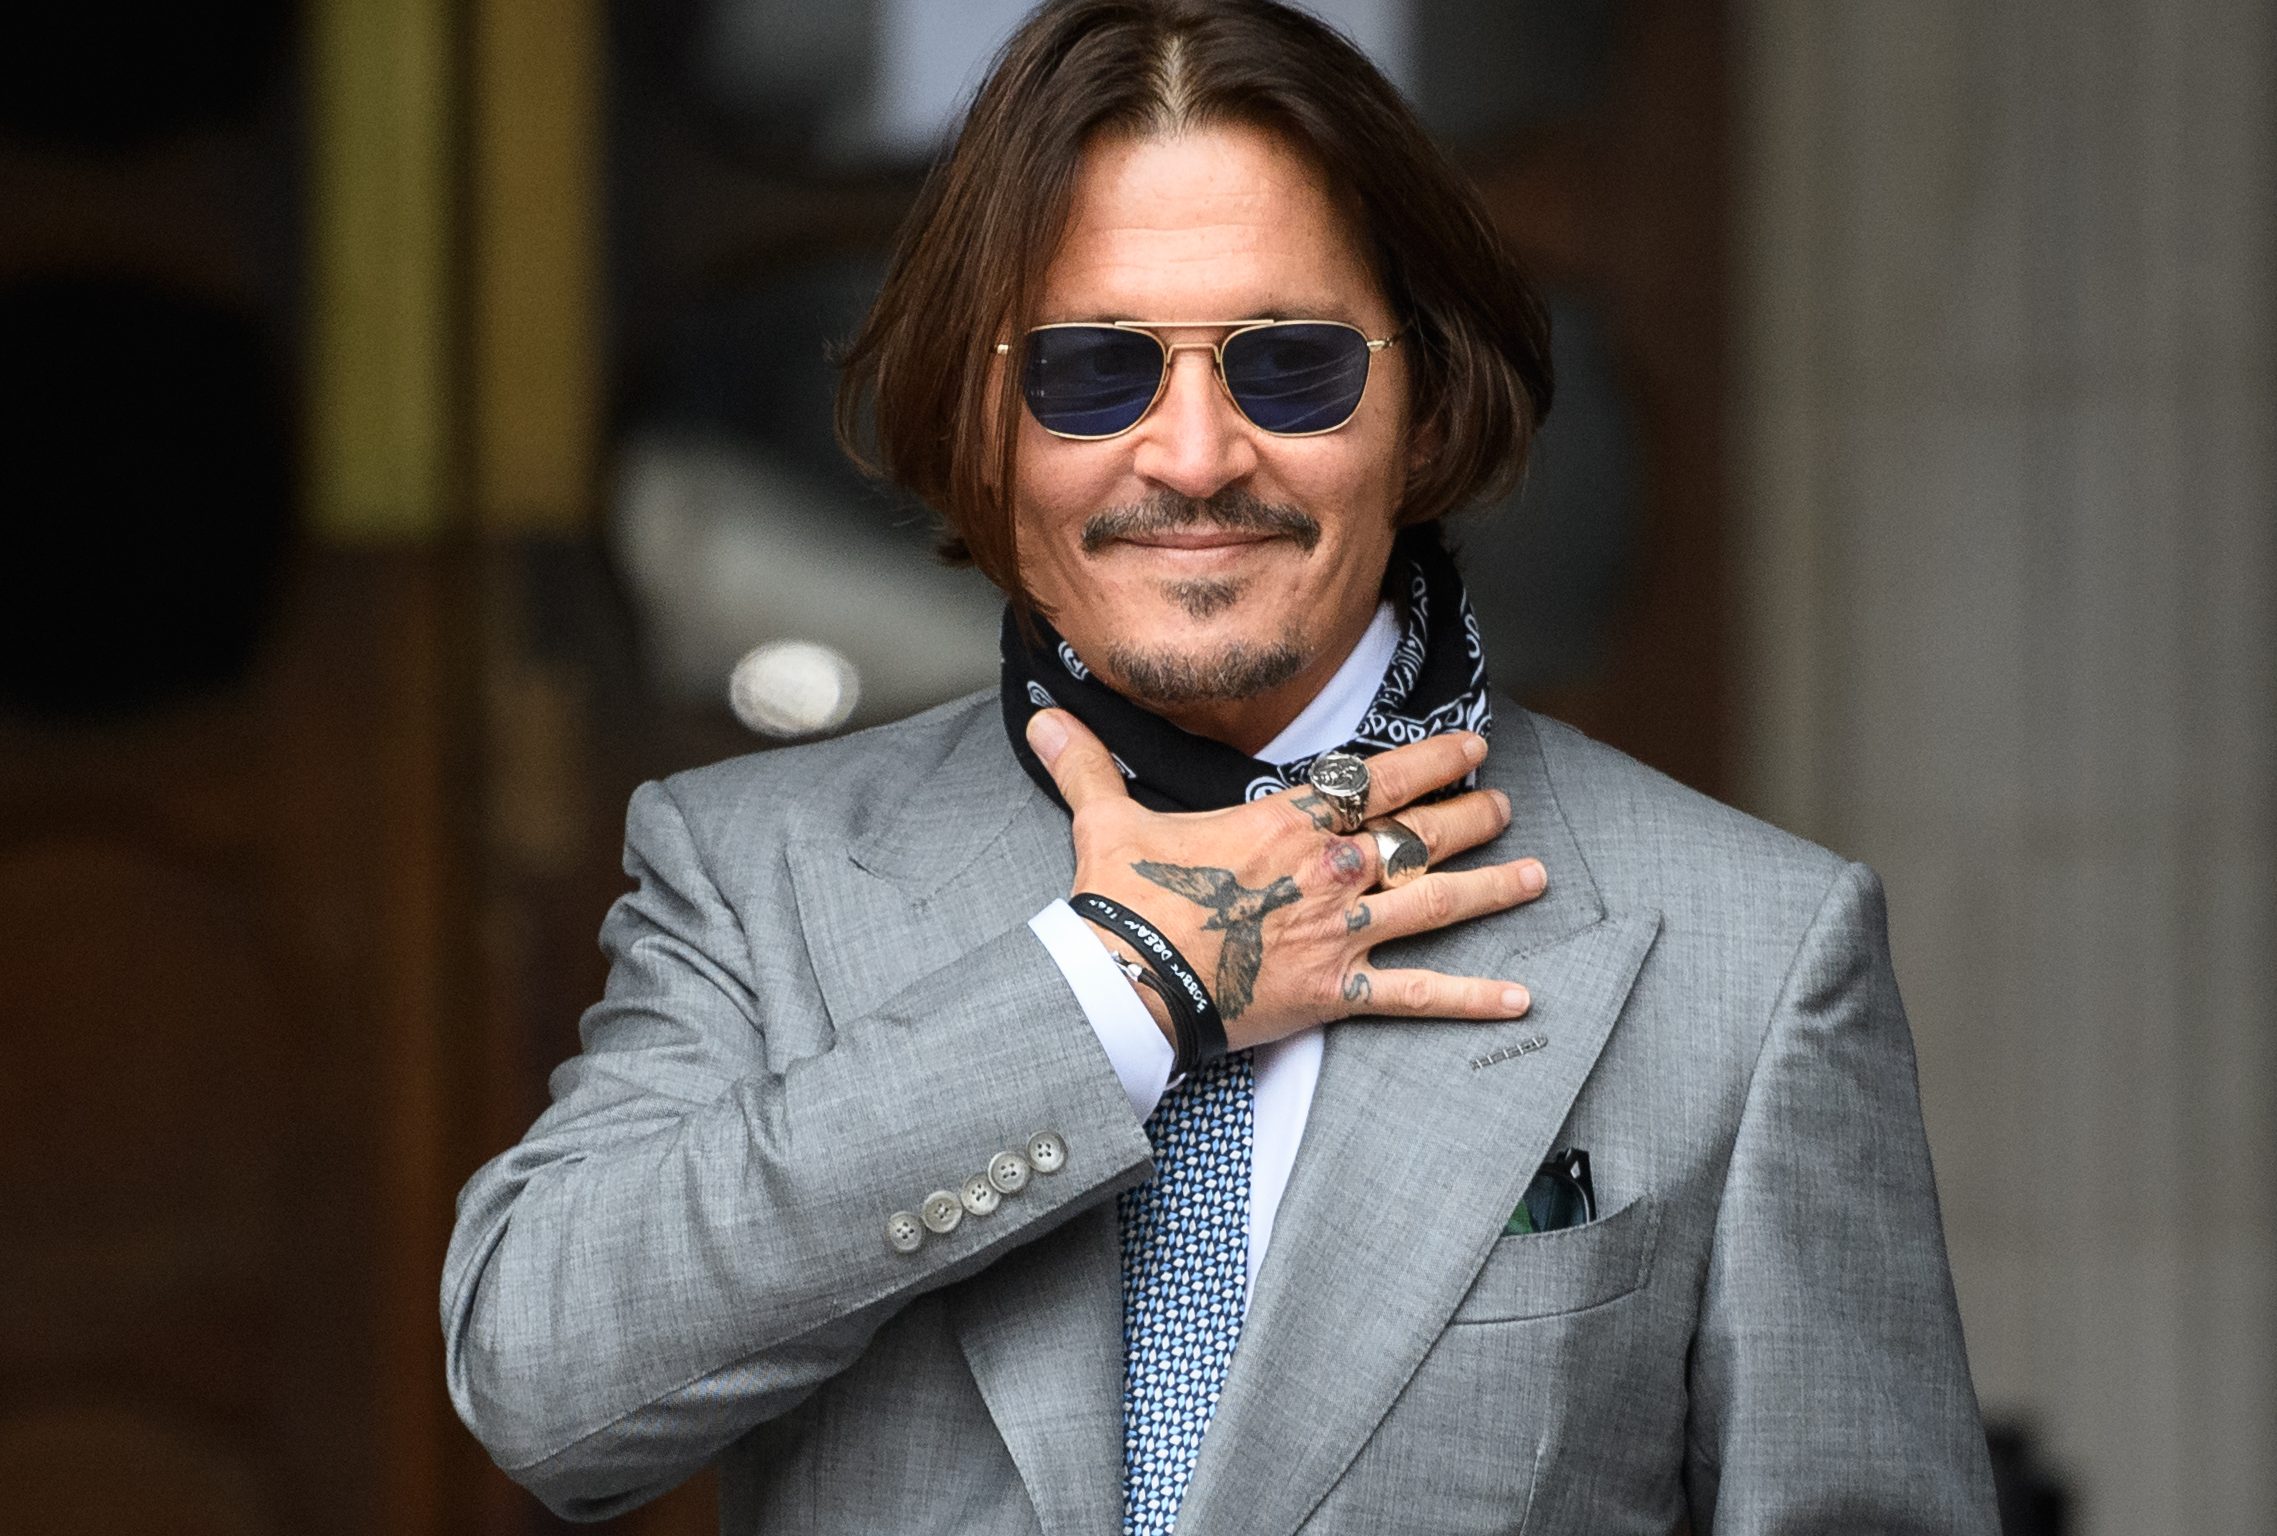 Johnny Depp will appear at Rihanna's lingerie show as the big surprise ...